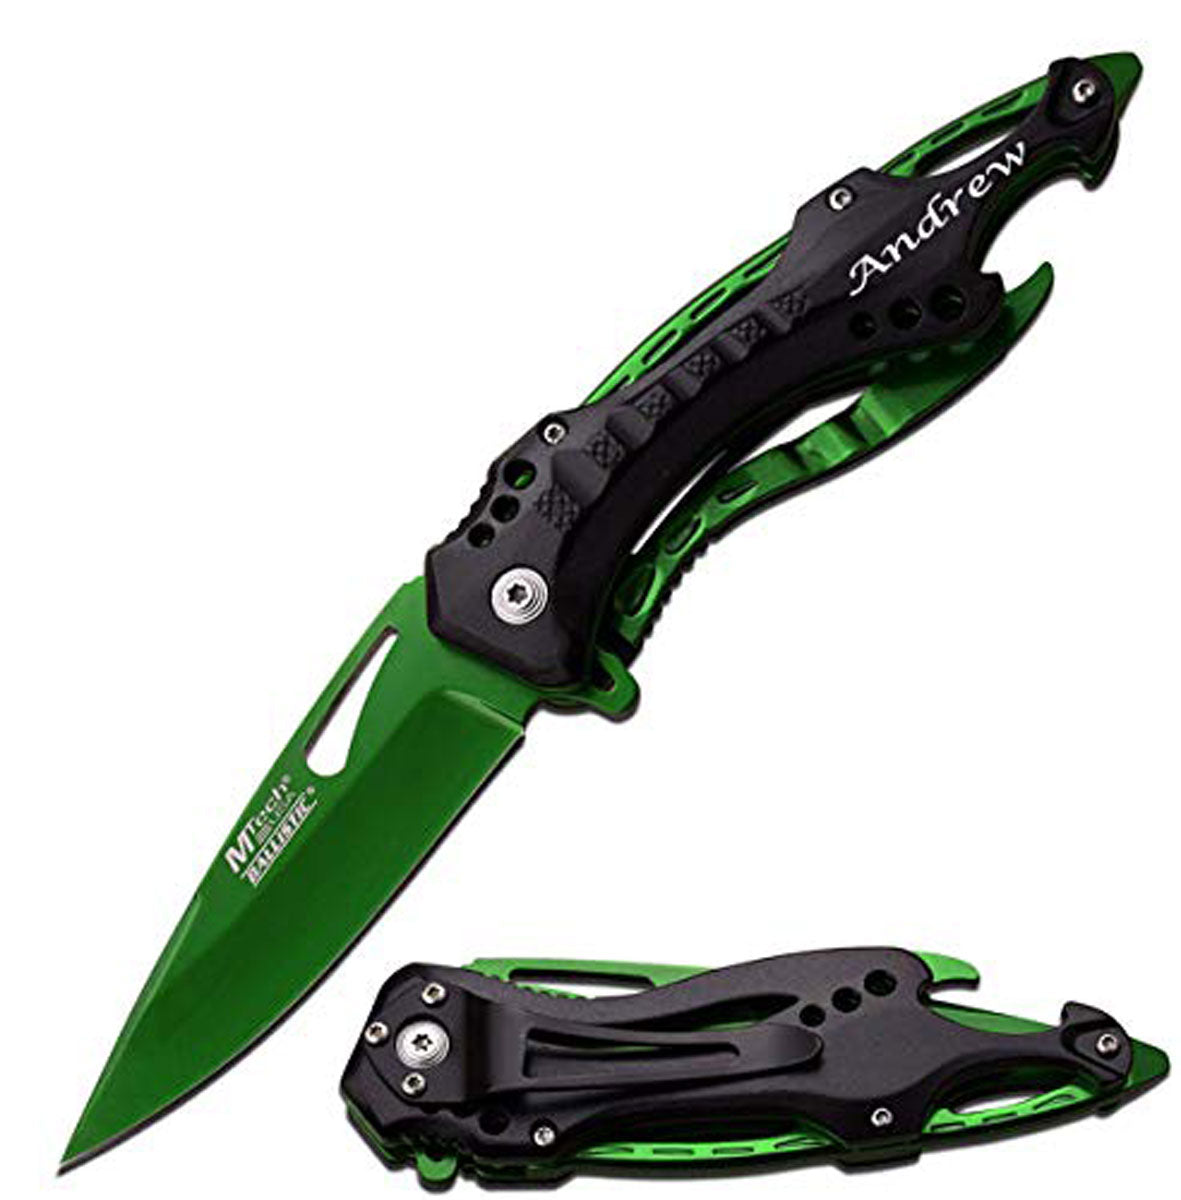 GIFTS INFINITY 4.5" Closed Personalized Engraved Folding Pocket Knife, Green Color Stainless Steel Tactical Blade Knife